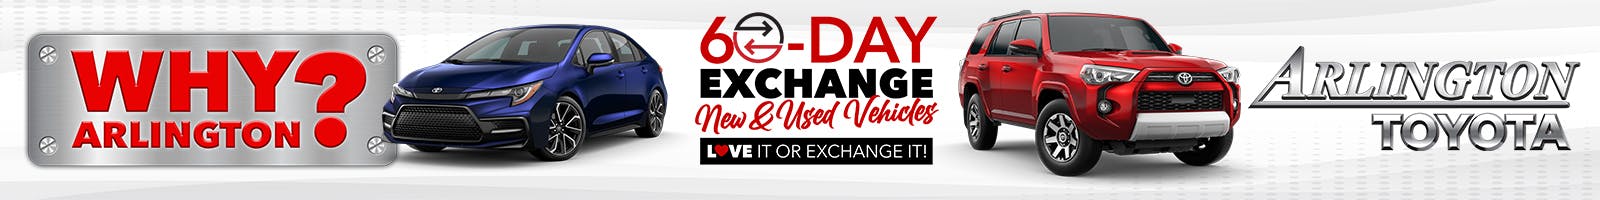 Why Arlington: 60 Day Exchange